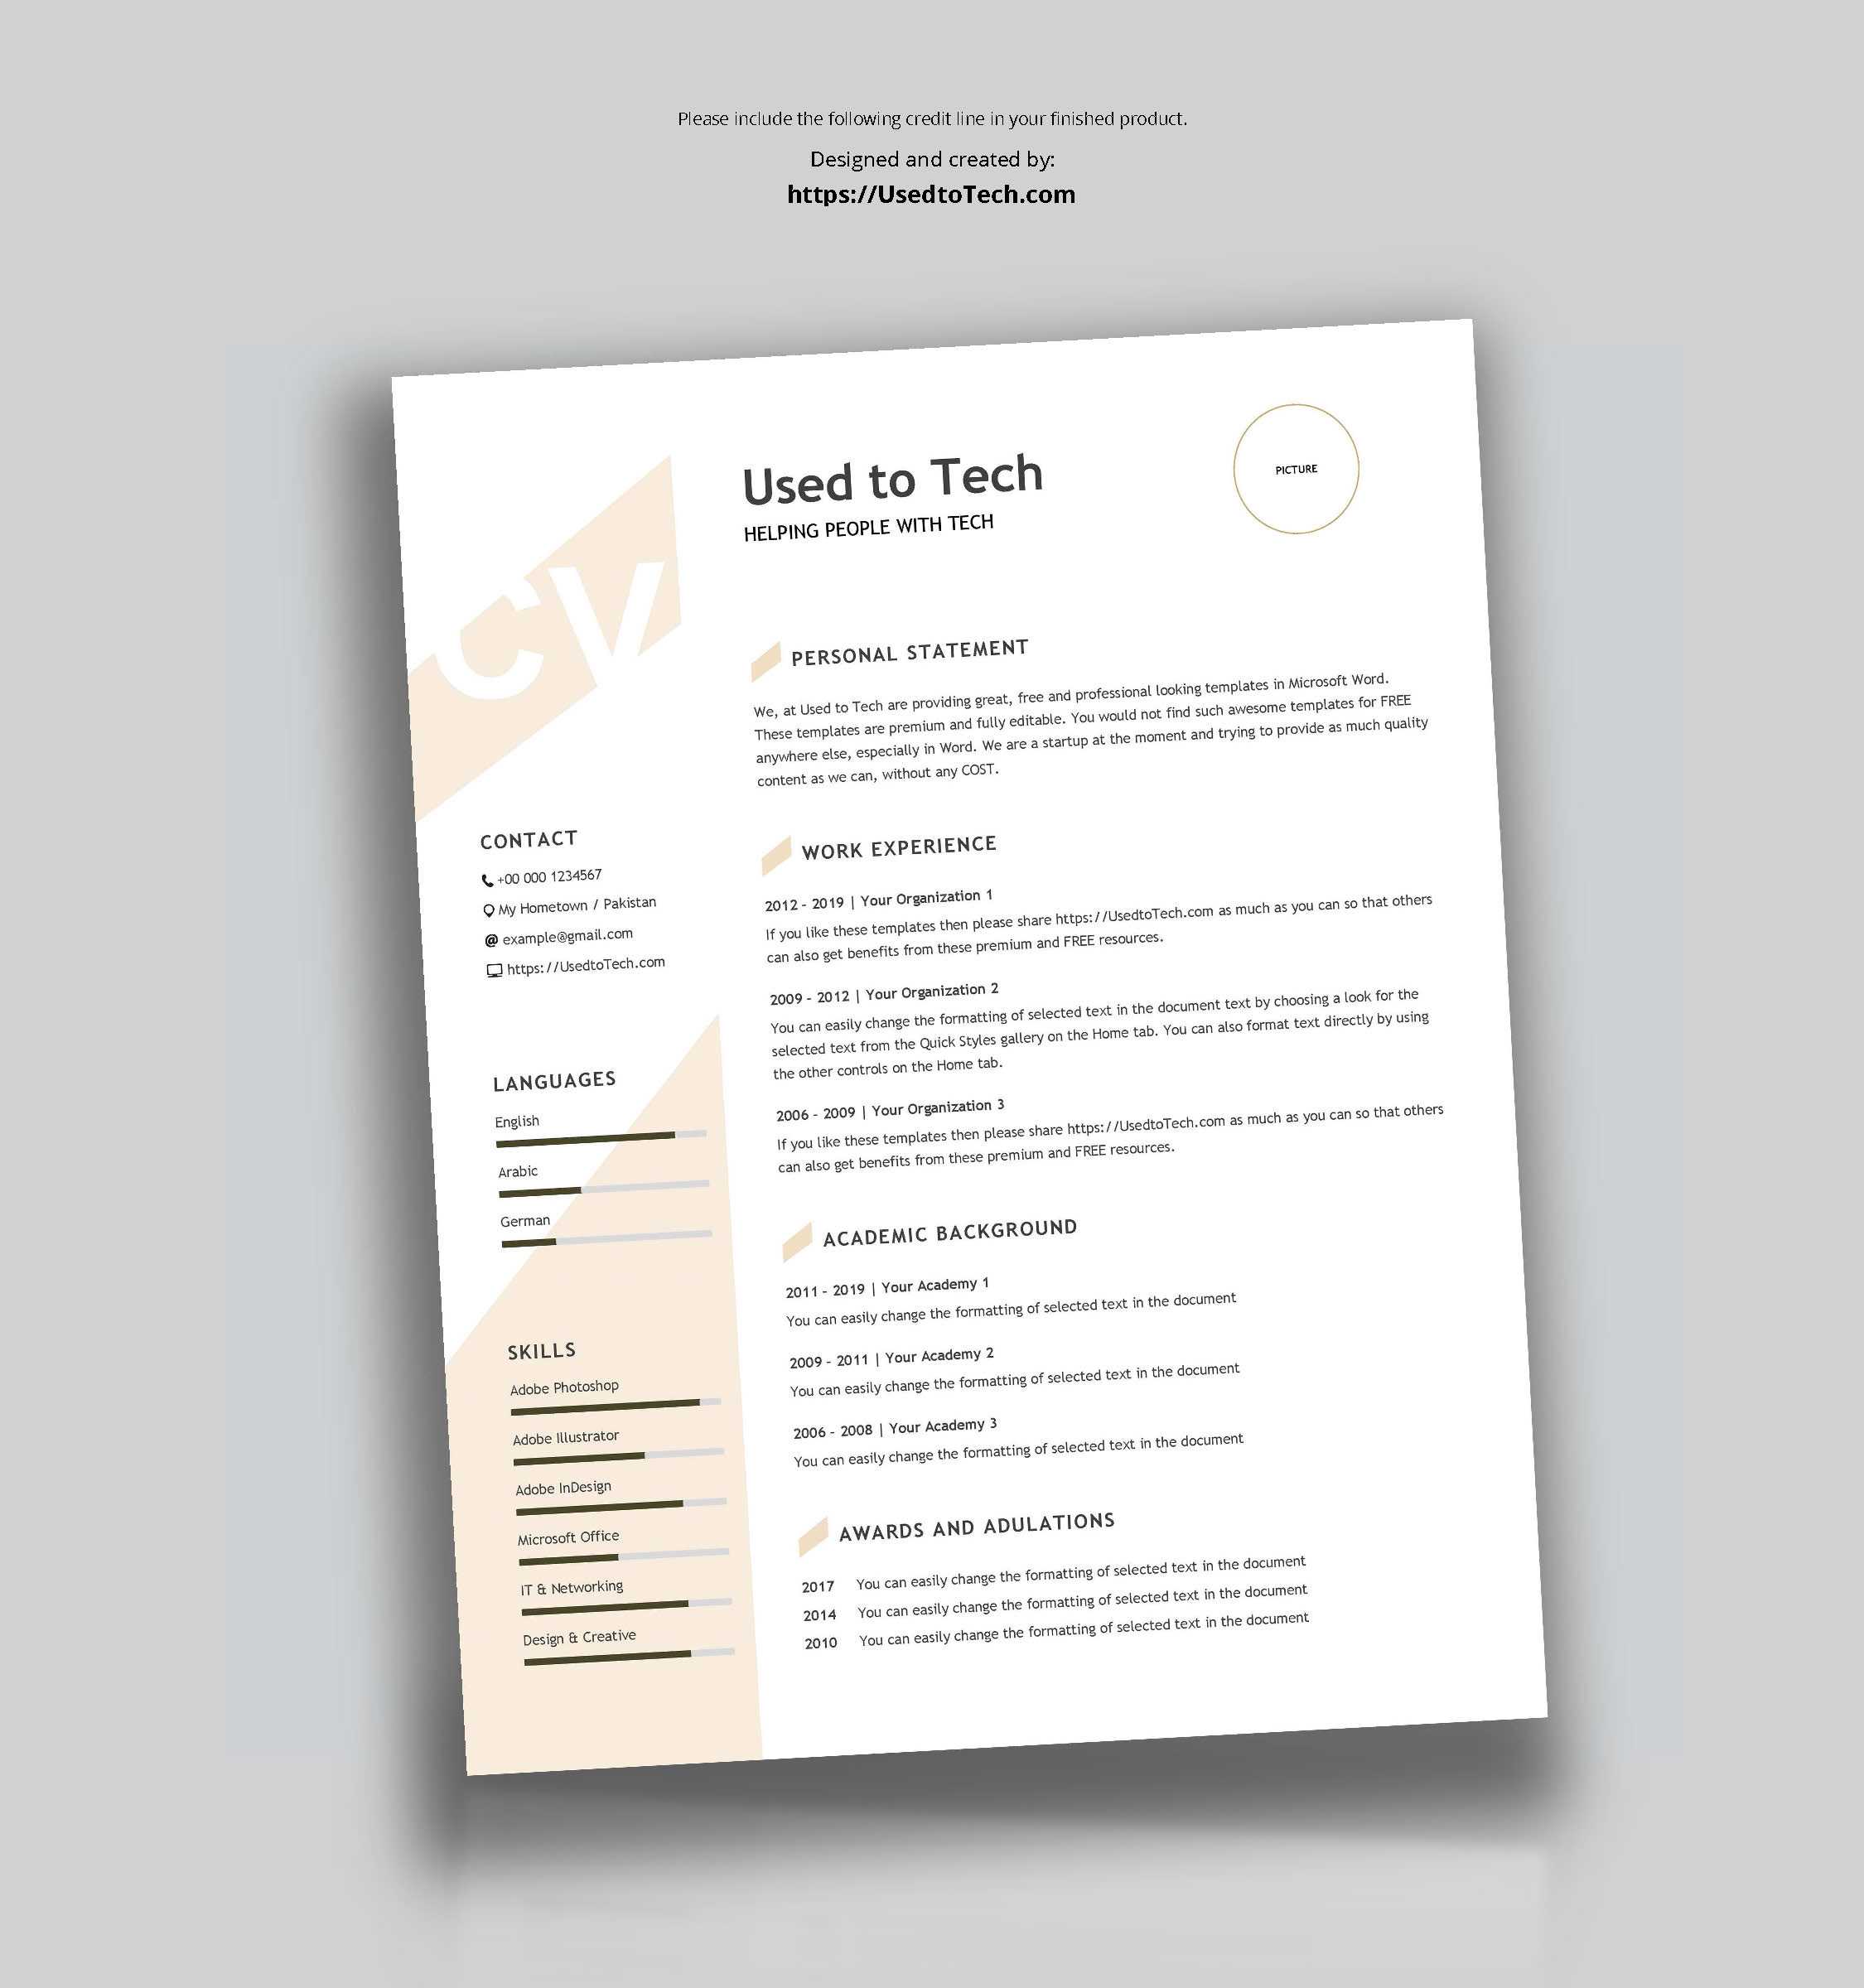 Modern Resume Template In Word Free - Used To Tech Throughout How To Find A Resume Template On Word